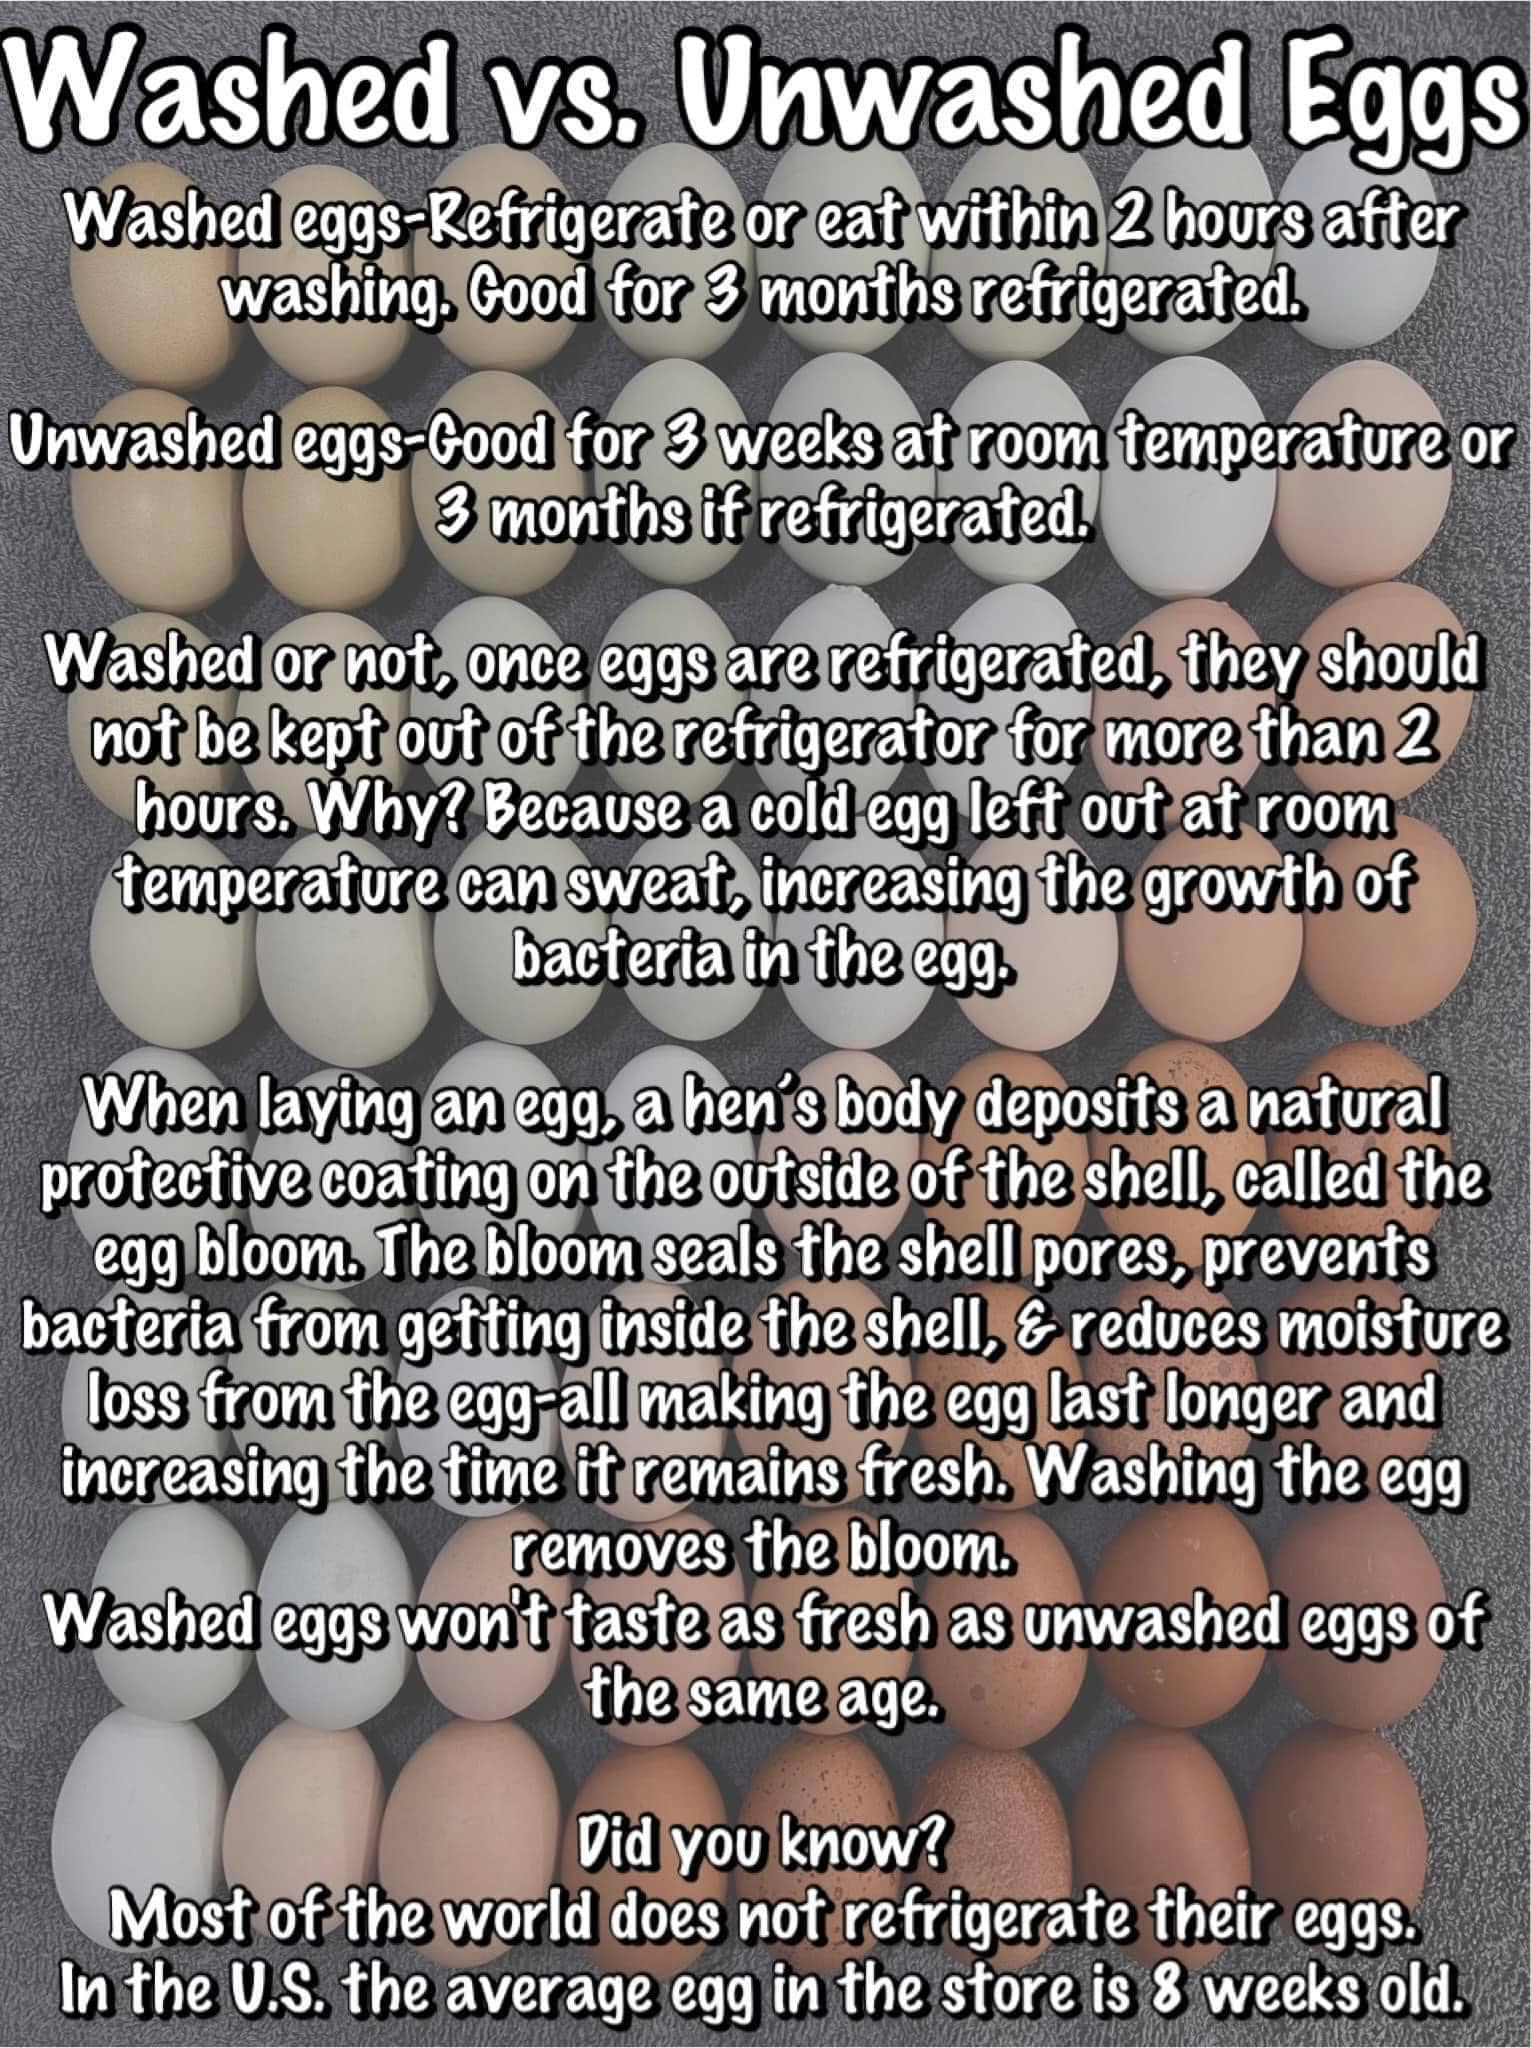 Washed vs Unwashed Eggs